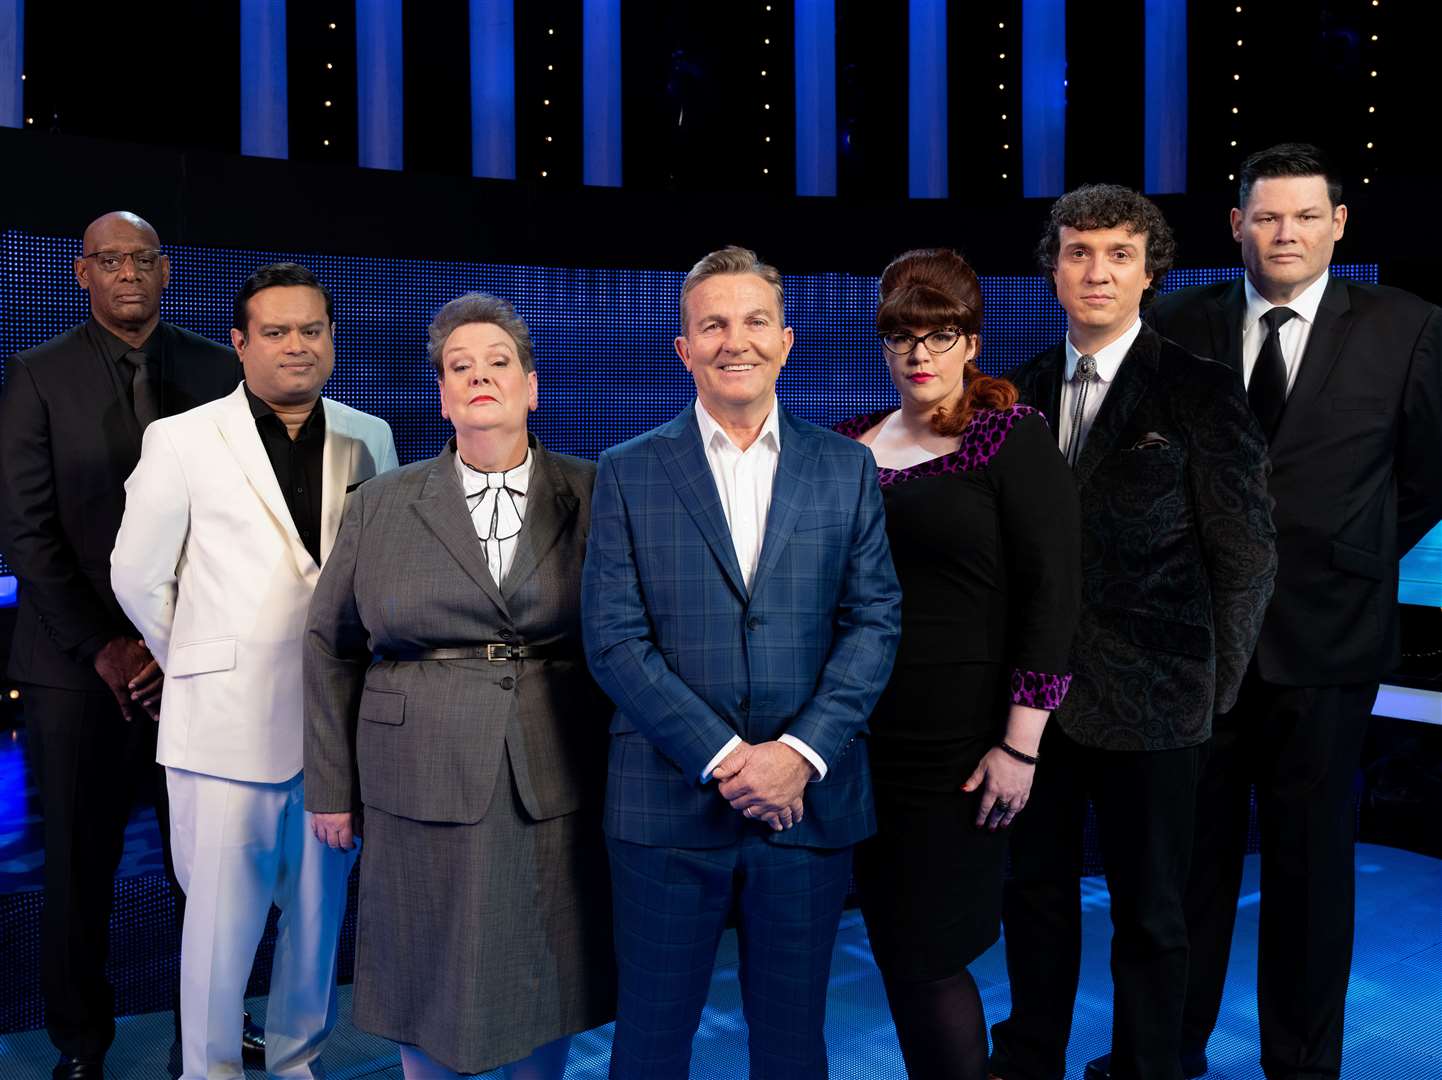 Bradley Walsh fronts The Chase, and Matt said all the team at the show were fun, friendly and enthusiastic. Picture: ITV